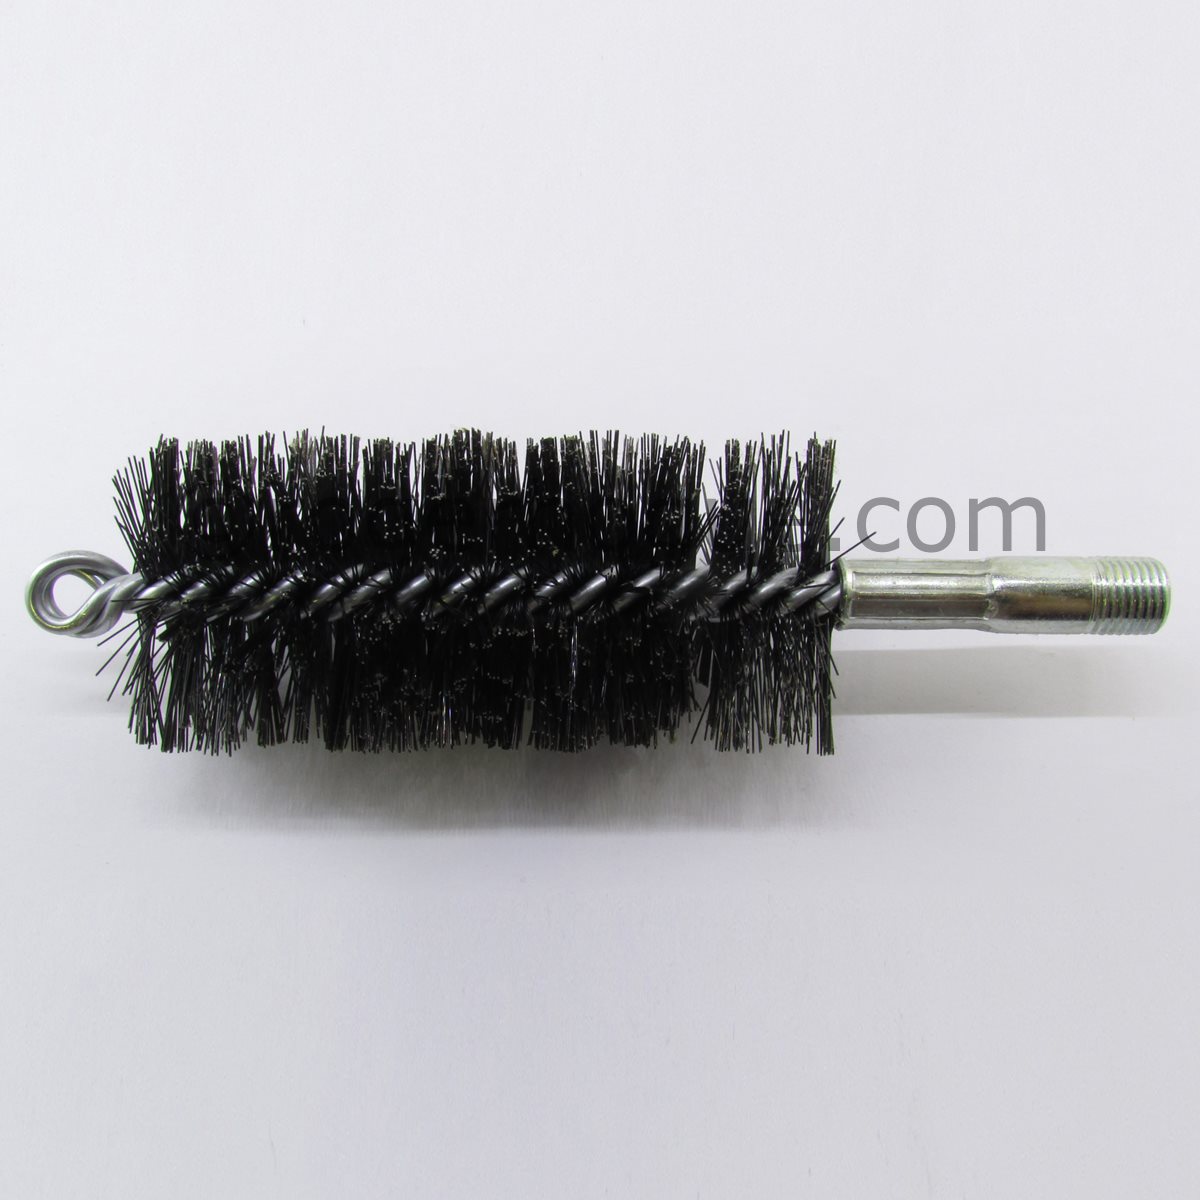 2'' DOUBLE SPIRAL BRUSH